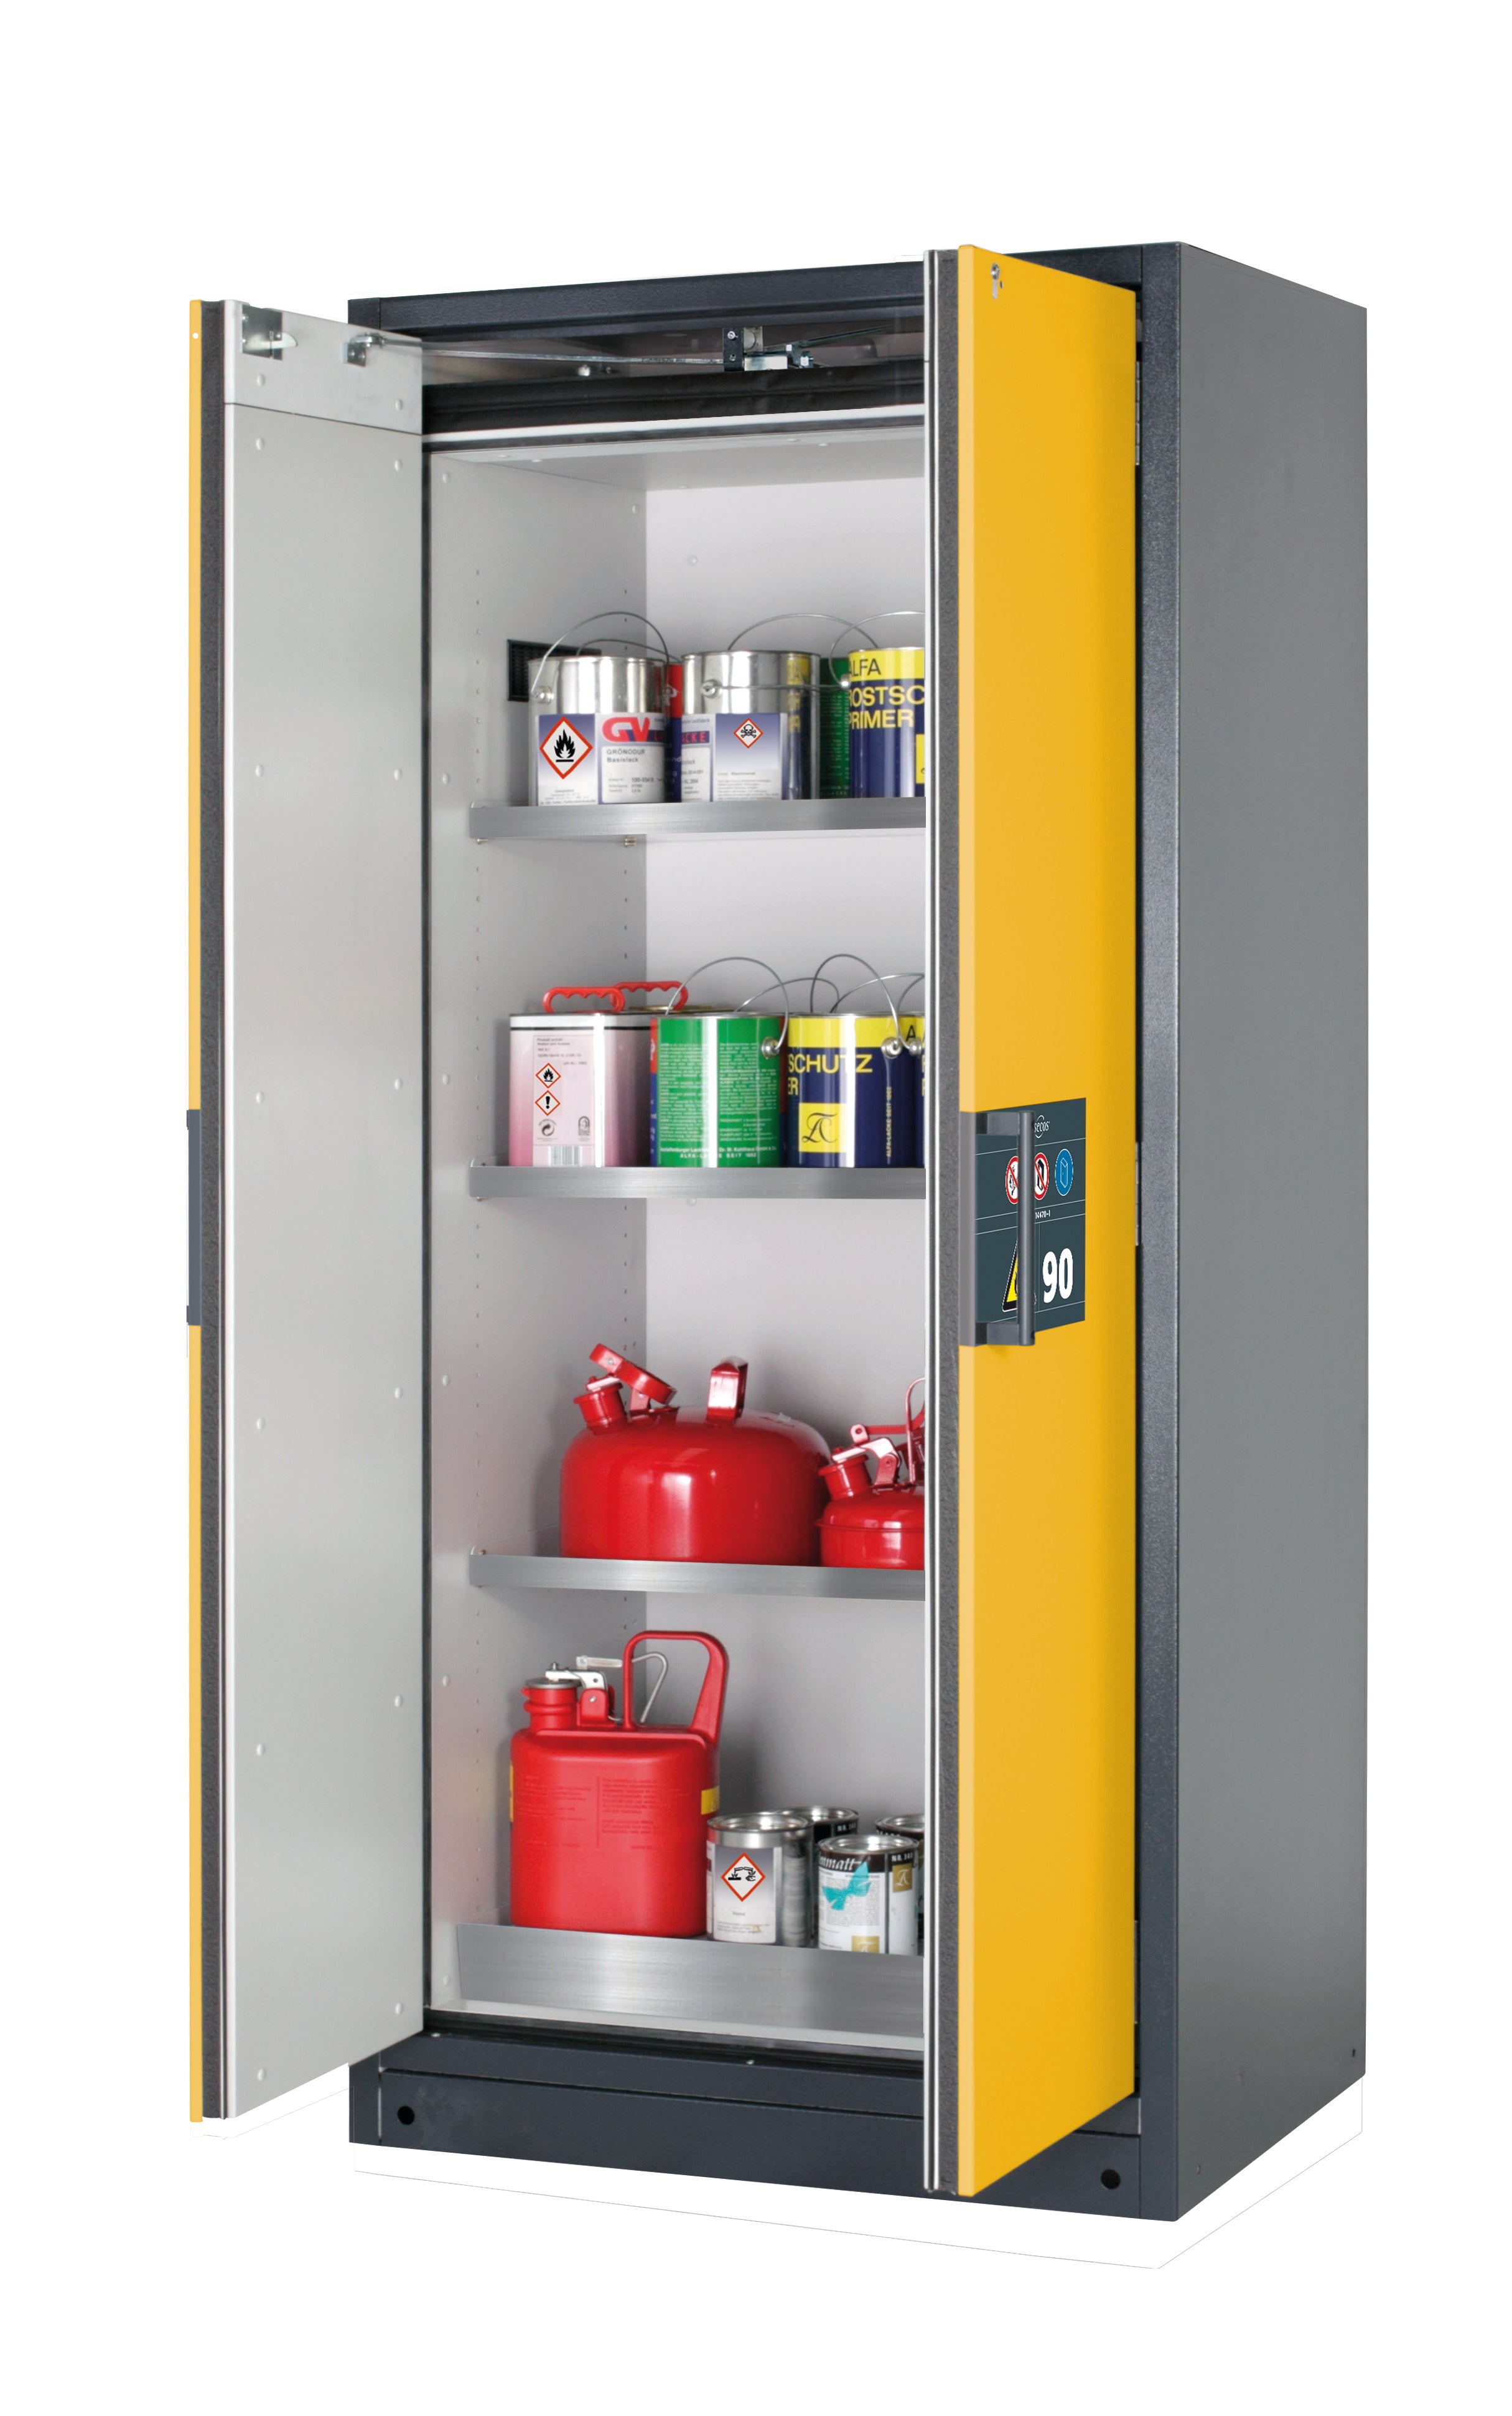 Type 90 safety storage cabinet Q-PEGASUS-90 model Q90.195.090.WDAC in warning yellow RAL 1004 with 3x shelf standard (stainless steel 1.4301),